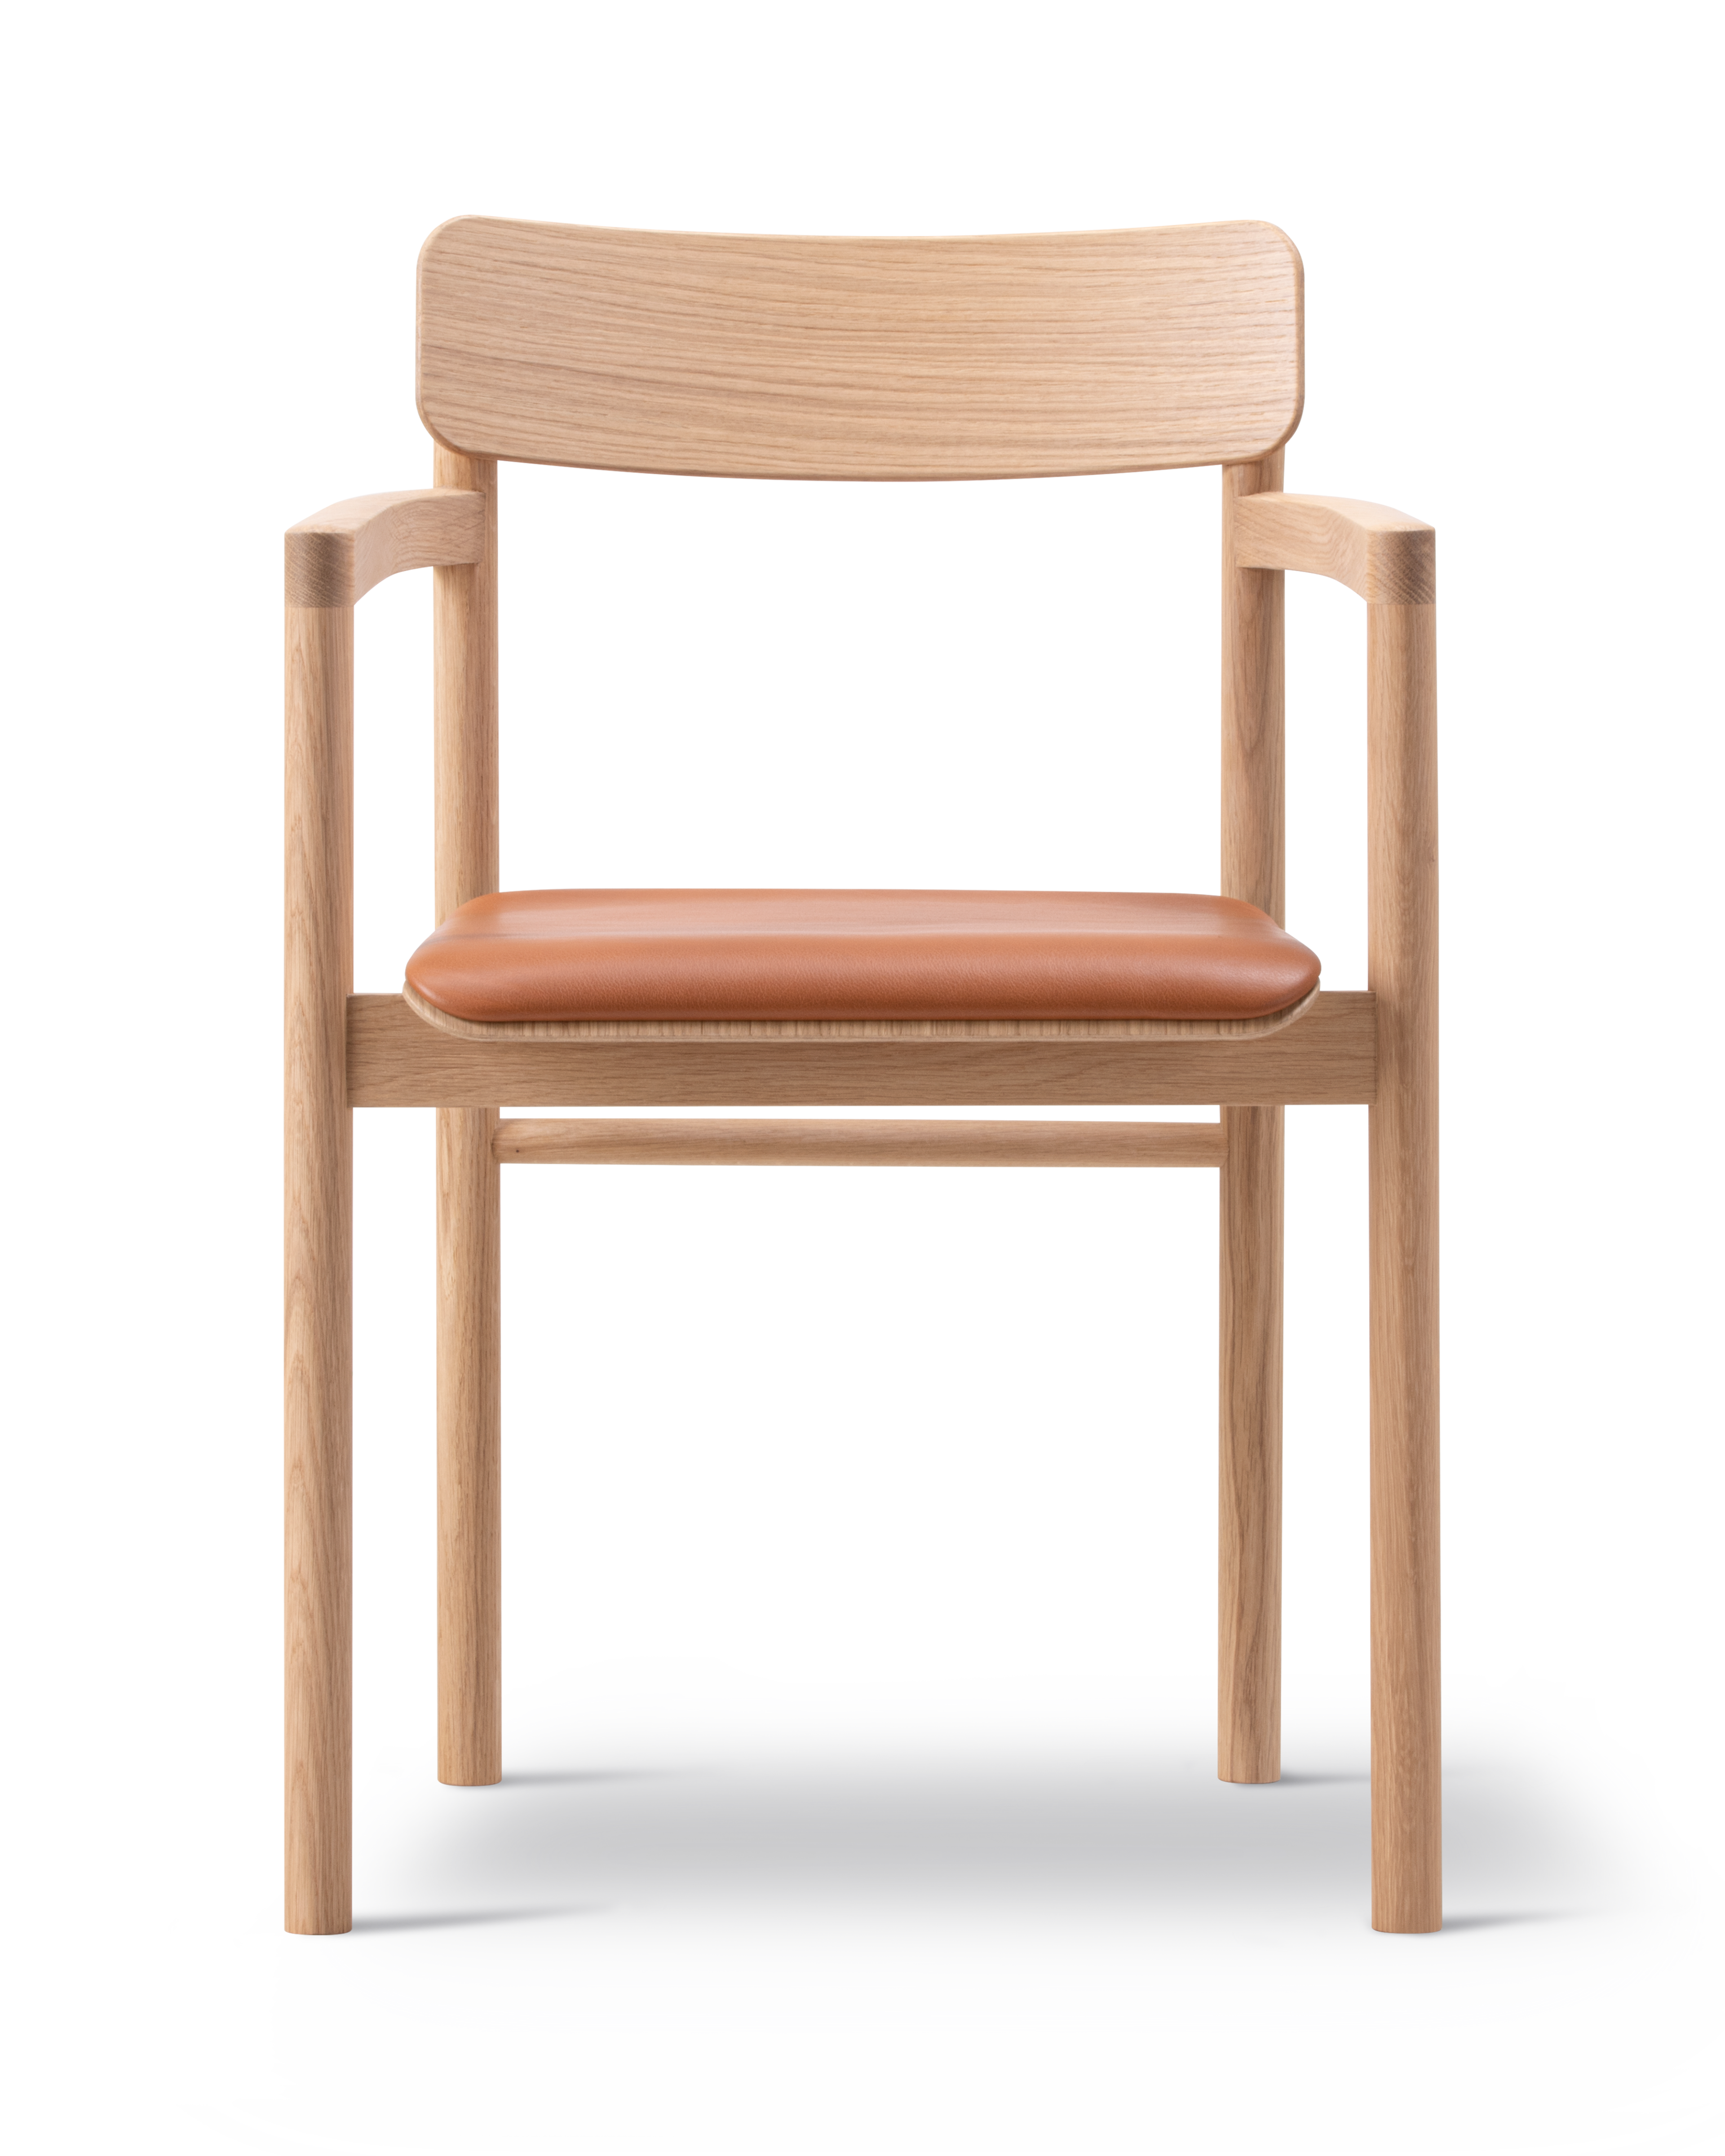 Cecilie Manz - Post Chair Seat upholstered